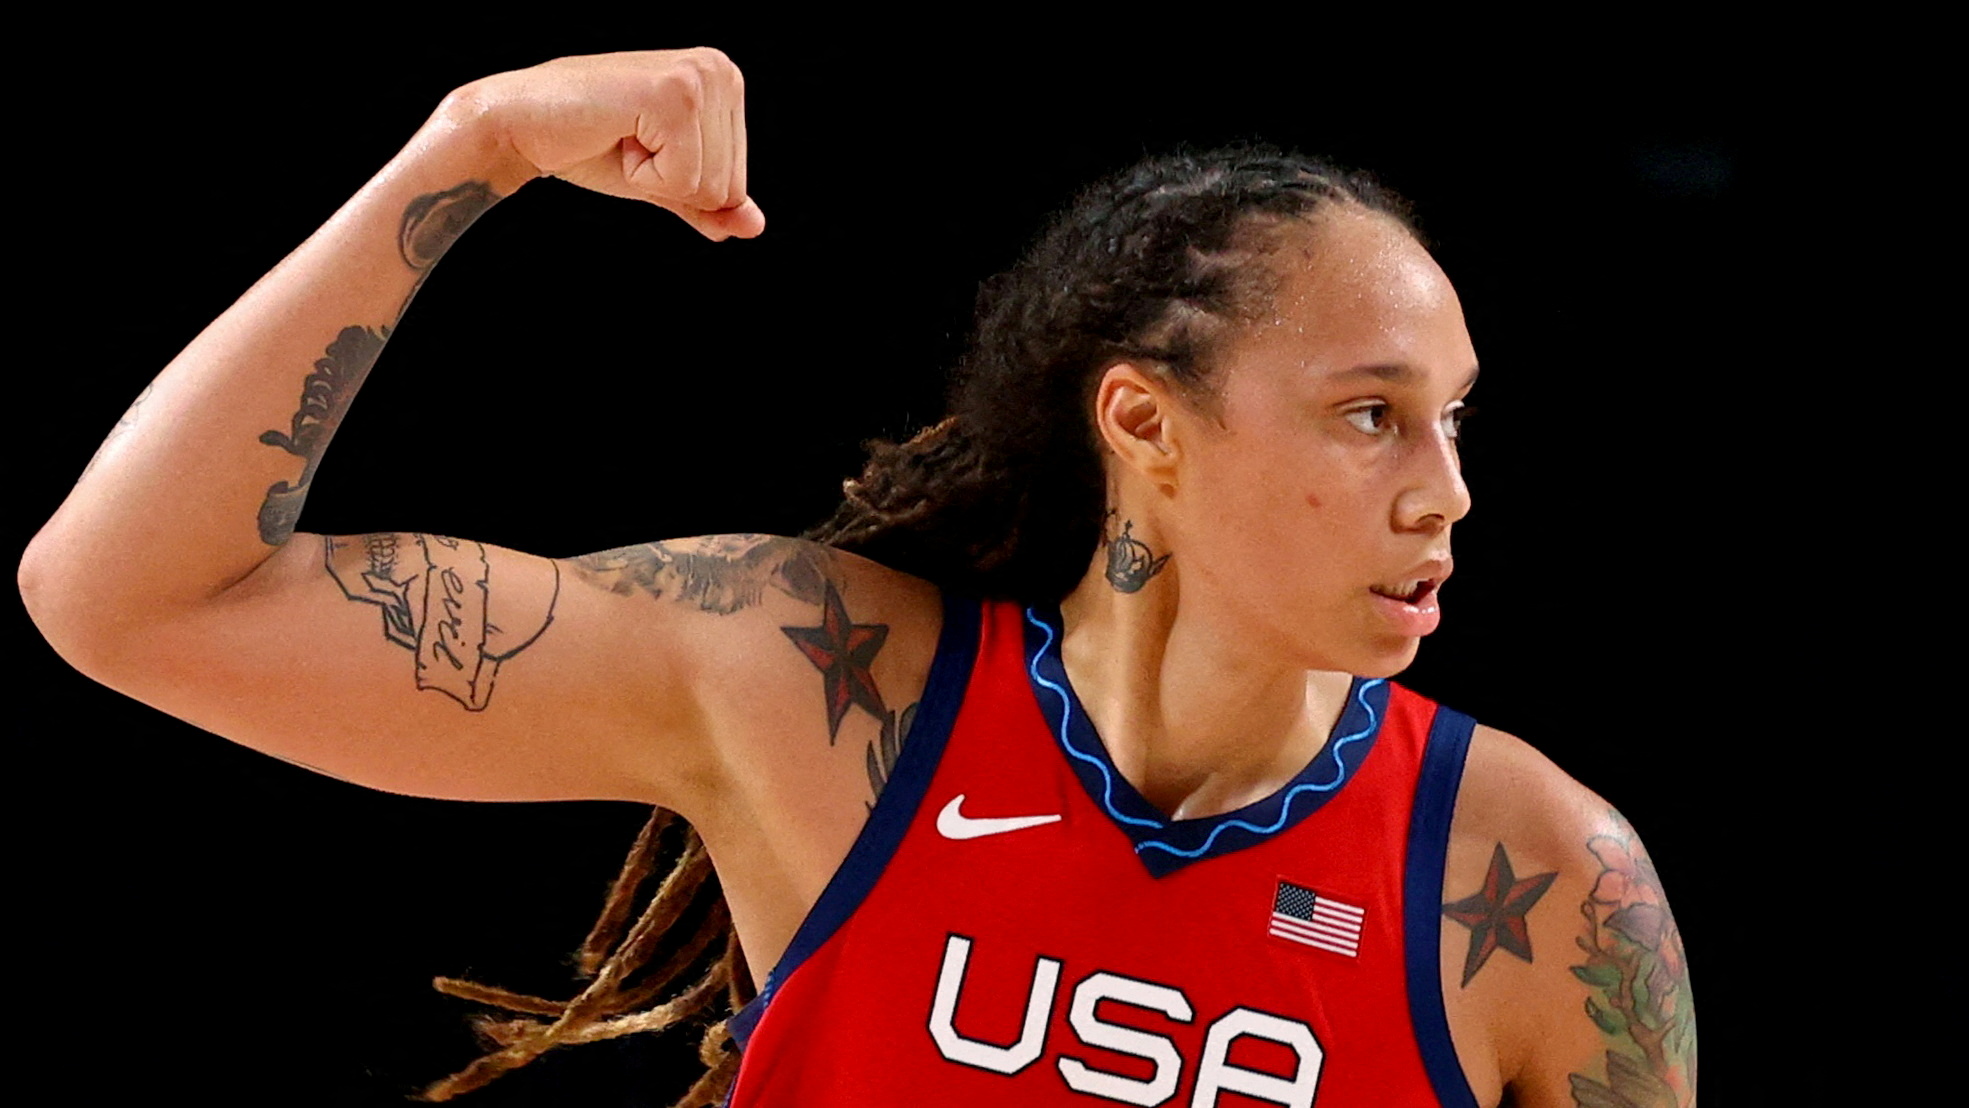 FILE PHOTO: Brittney Griner of the United States gestures during a game against Australia at Saitama Super Arena in their Tokyo 2020 Olympic women's basketball quarterfinal game in Saitama, Japan August 4, 2021.